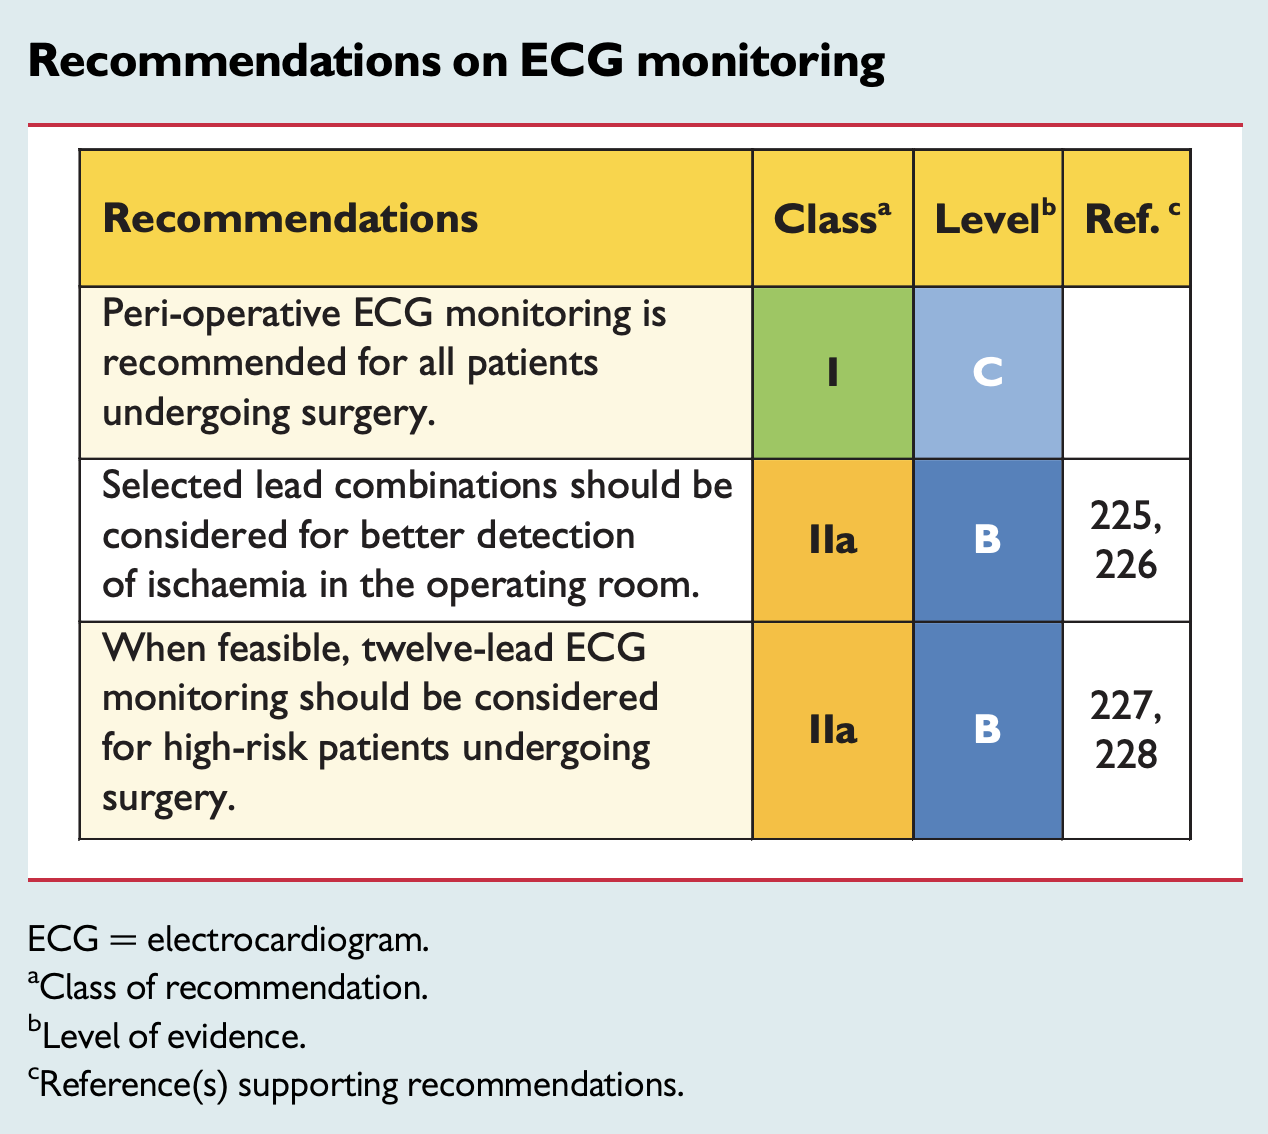 Recommendations on ECG monitoring